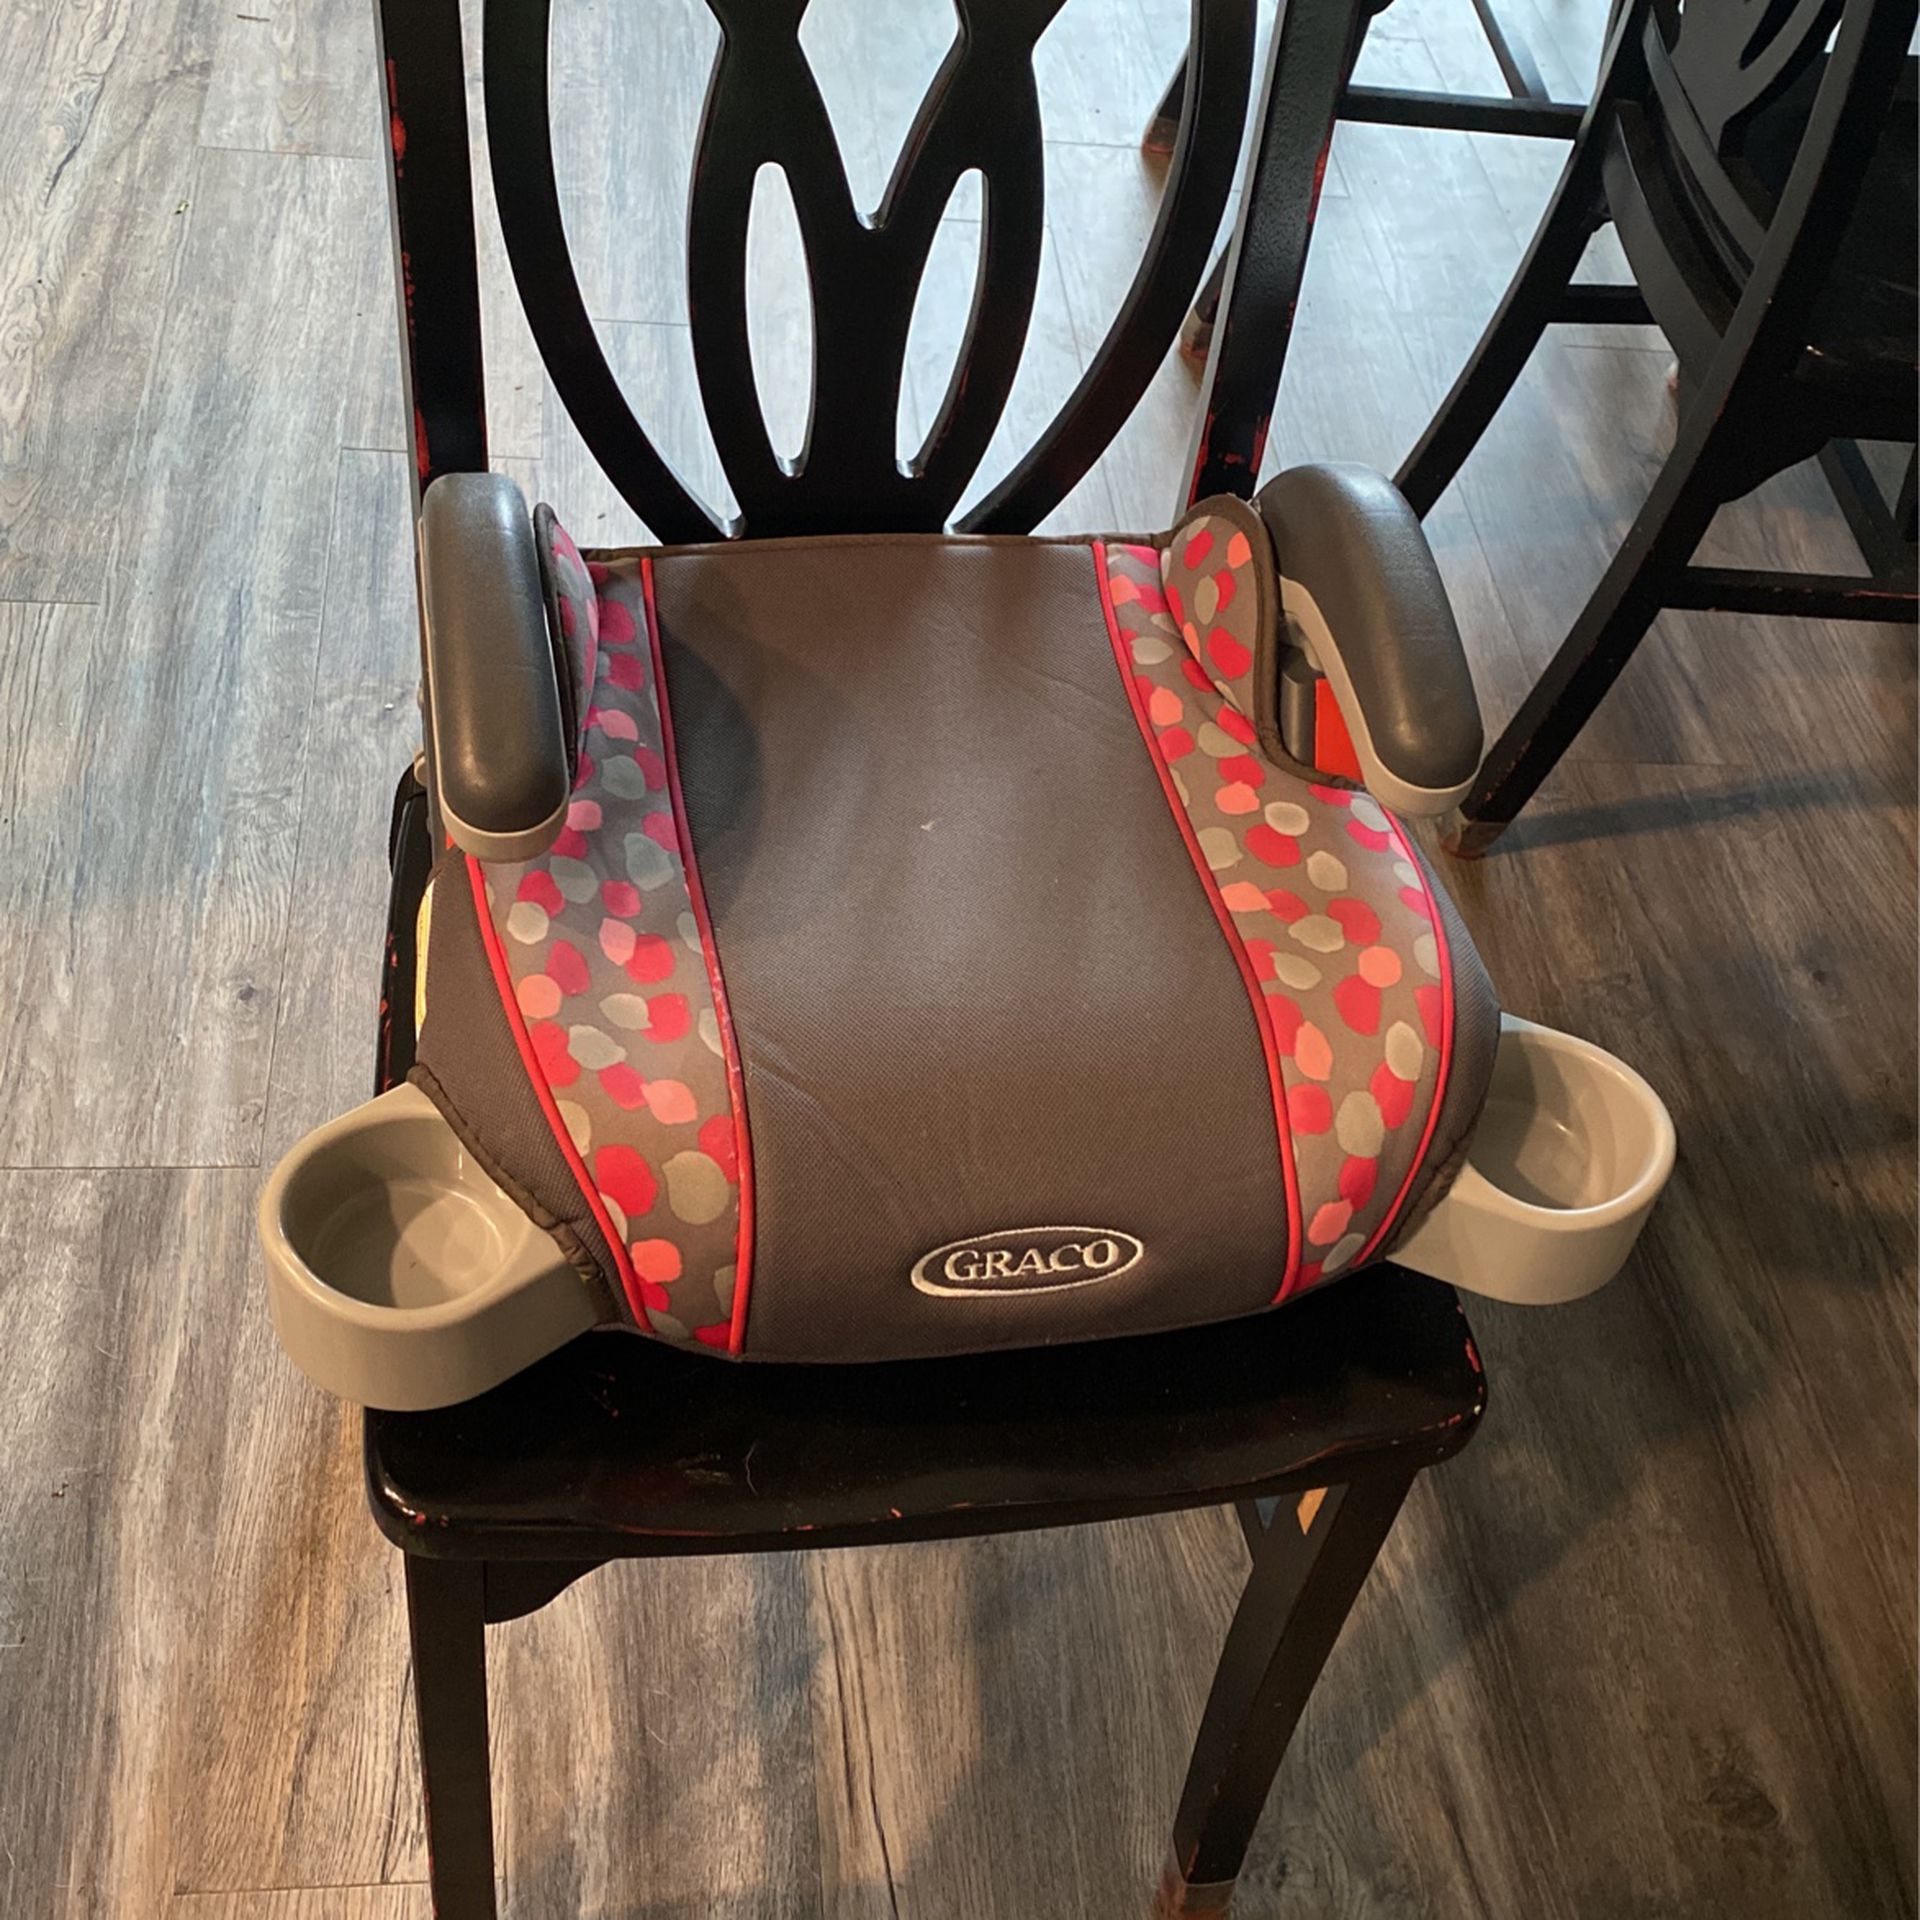 Graco Booster Seat With 2 Cup Holders